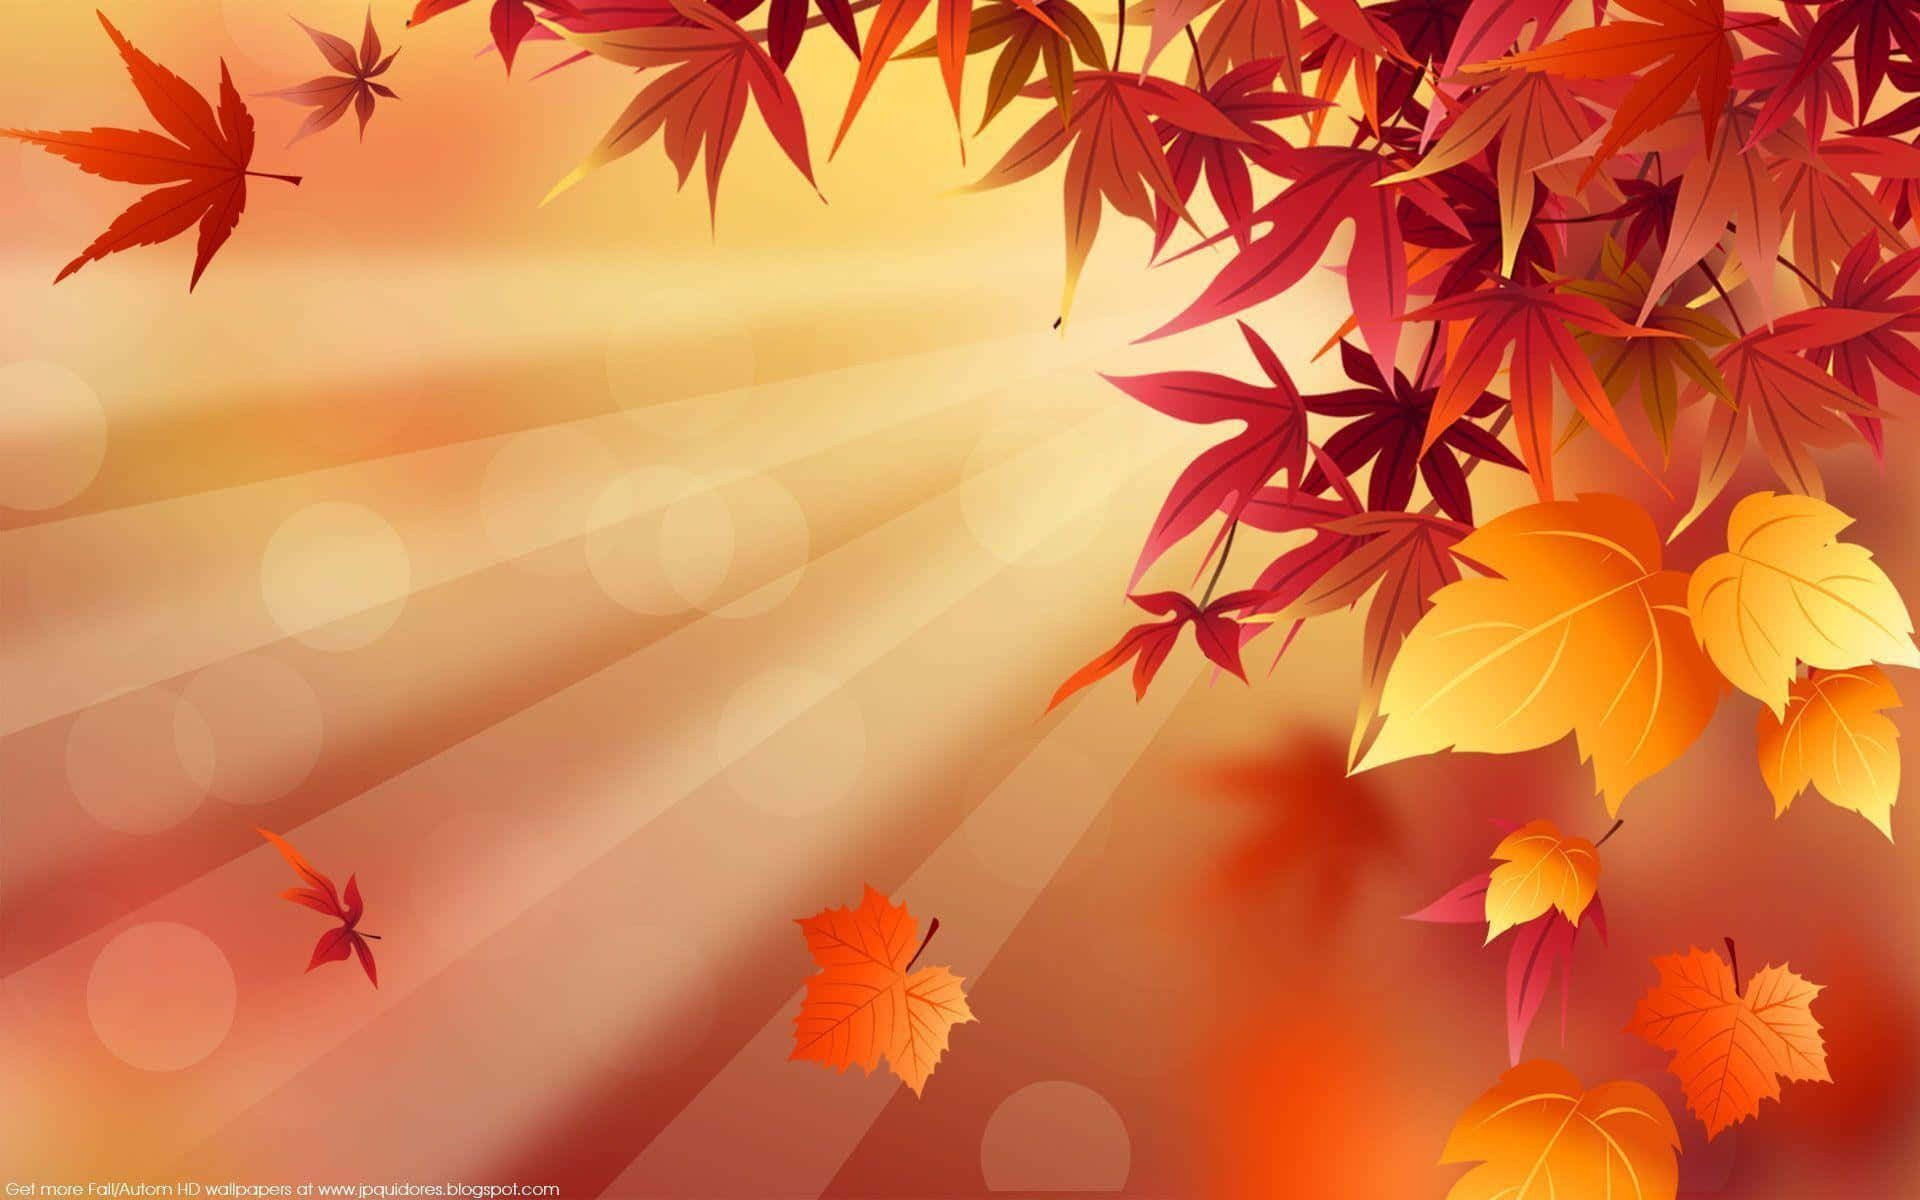 Enjoy the warm and inviting colors of autumn with this Fall Desktop Wallpaper